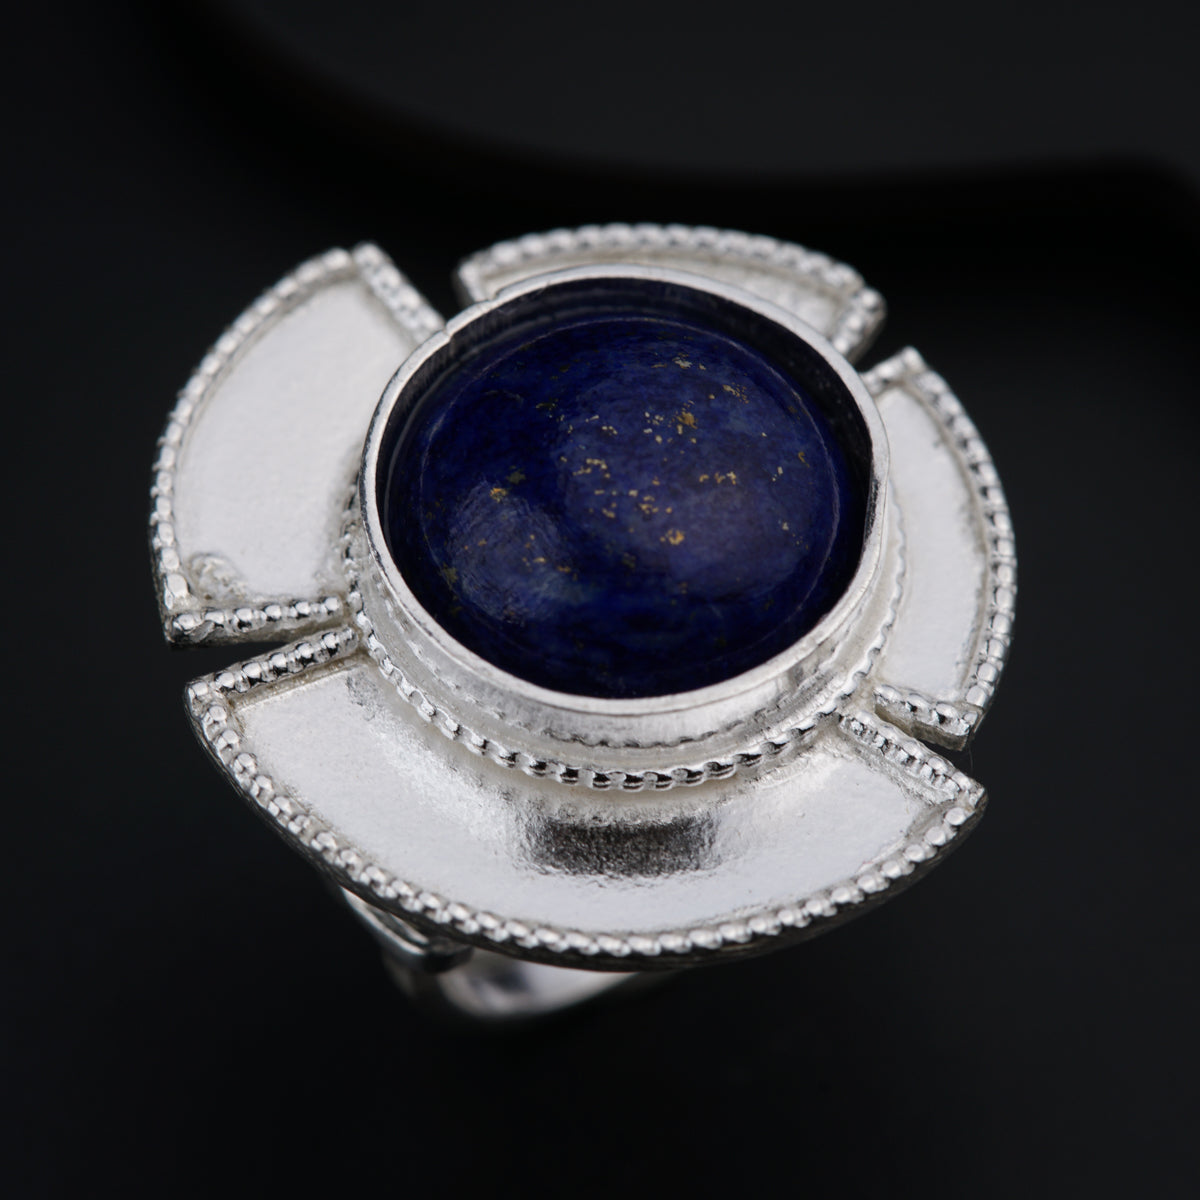 a ring with a blue stone in the middle of it